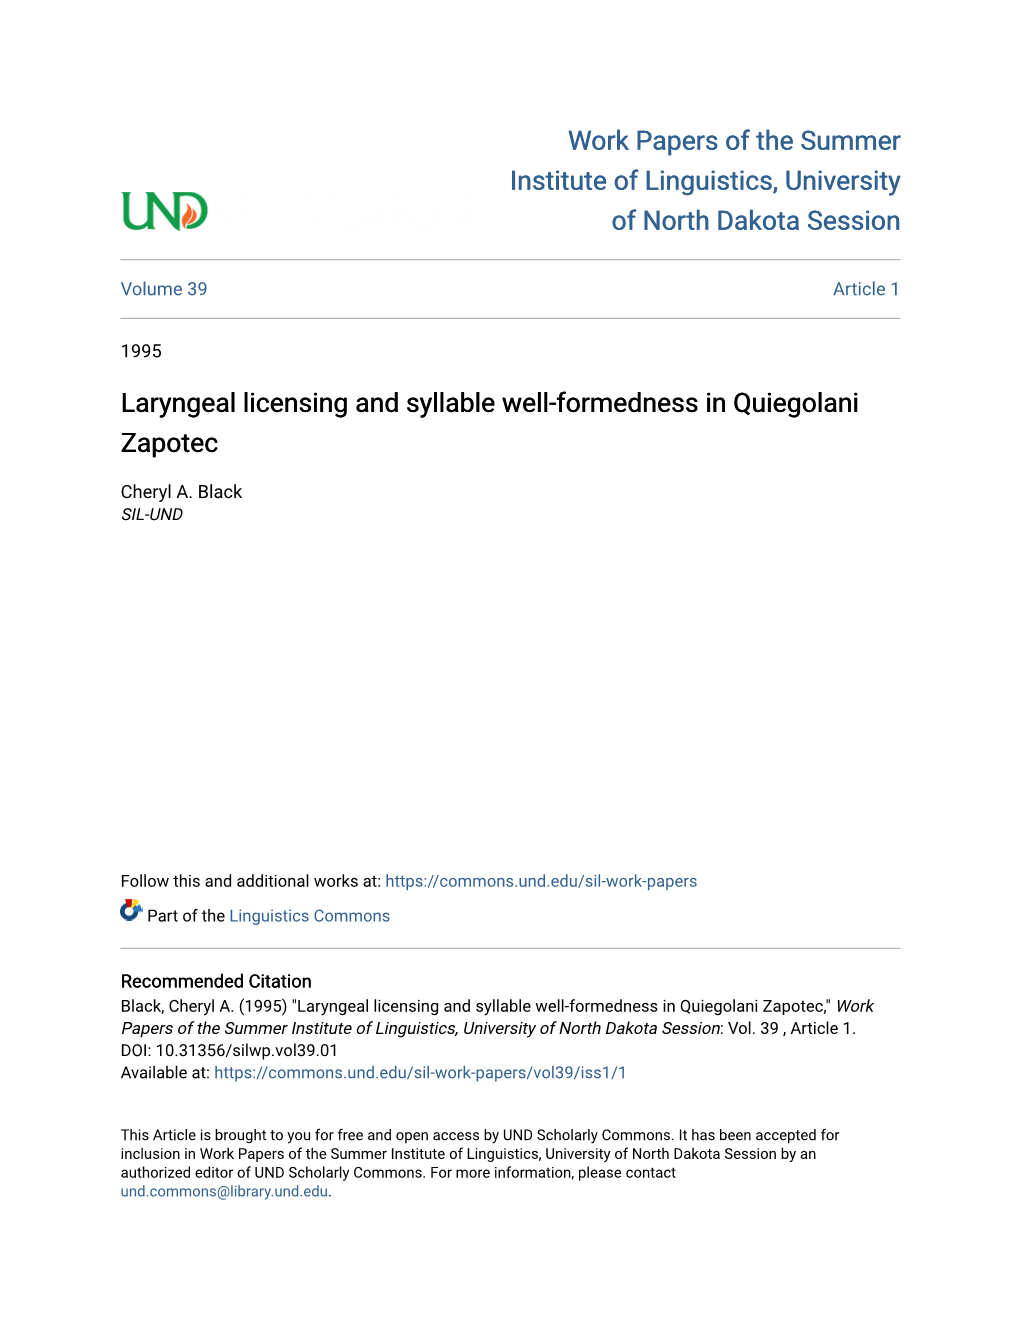 Laryngeal Licensing and Syllable Well-Formedness in Quiegolani Zapotec